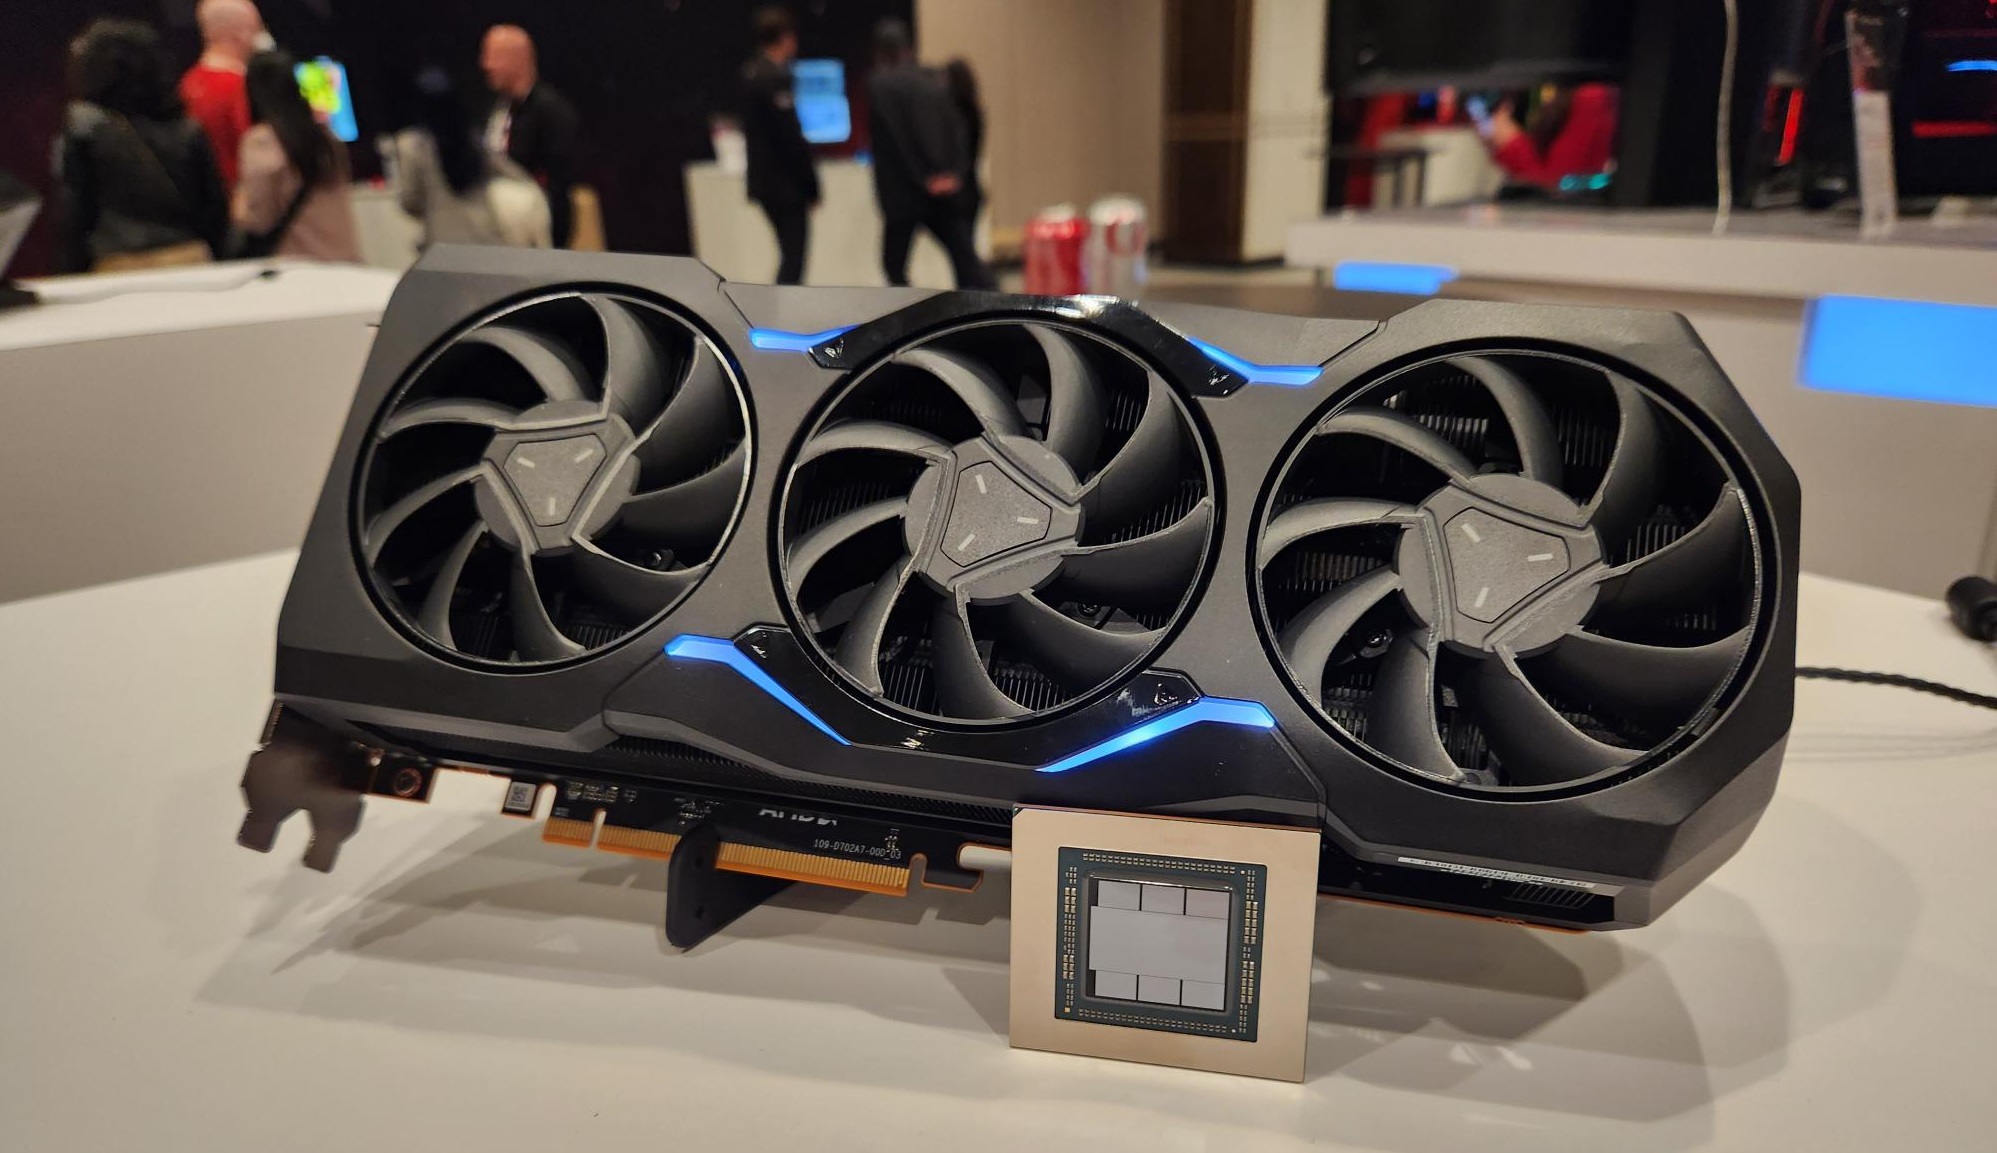 AMD Radeon RX 7900 XTX – release date, price, specs, and benchmarks